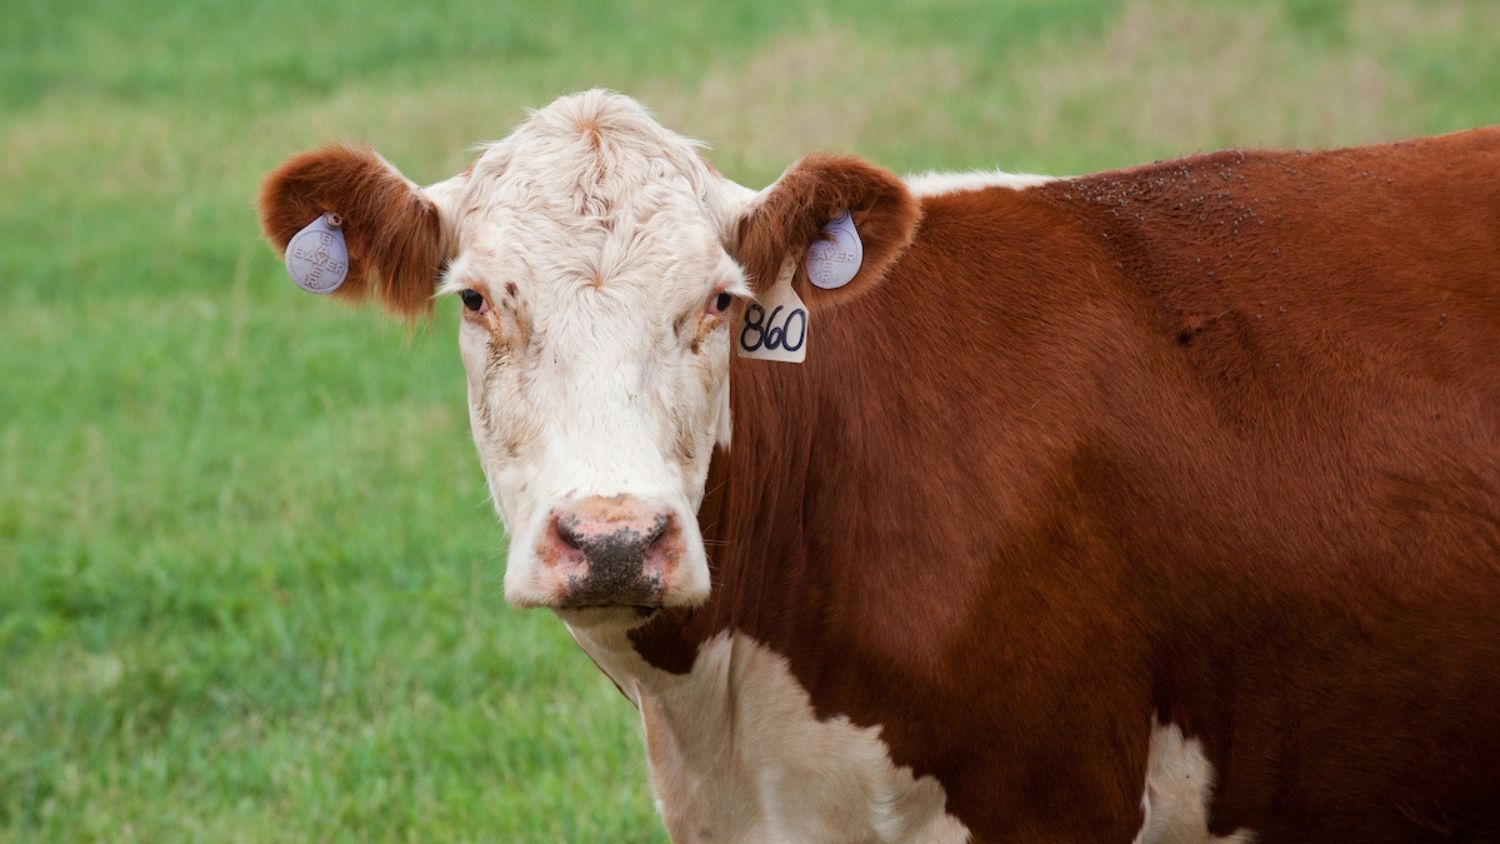 A beef cow with an ear tag